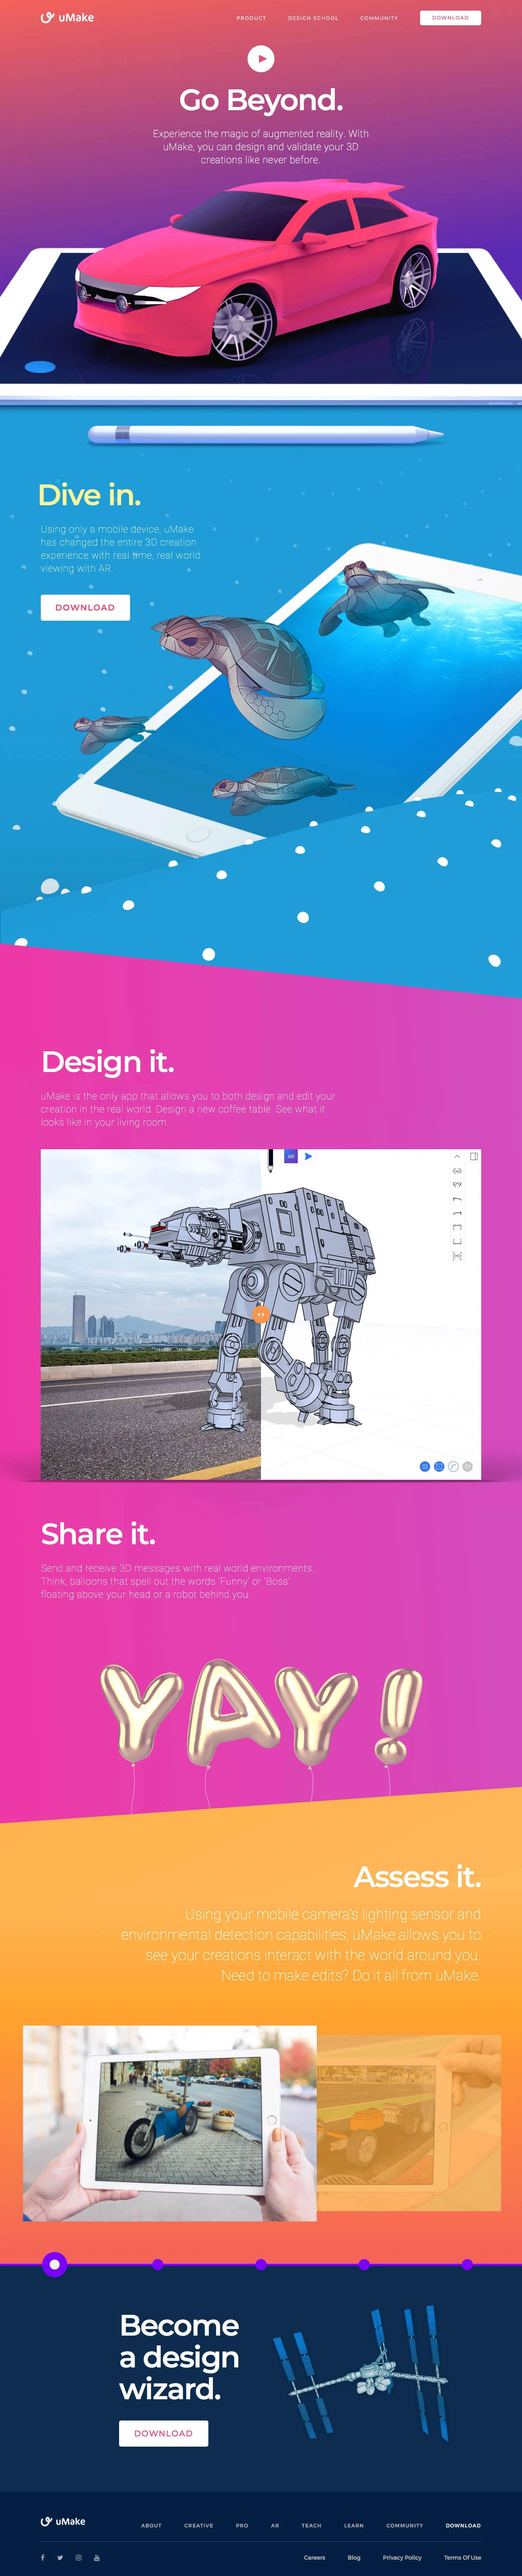 uMake Landing Page Example: Experience the magic of augmented reality. With uMake, you can design and validate your 3D creations like never before.